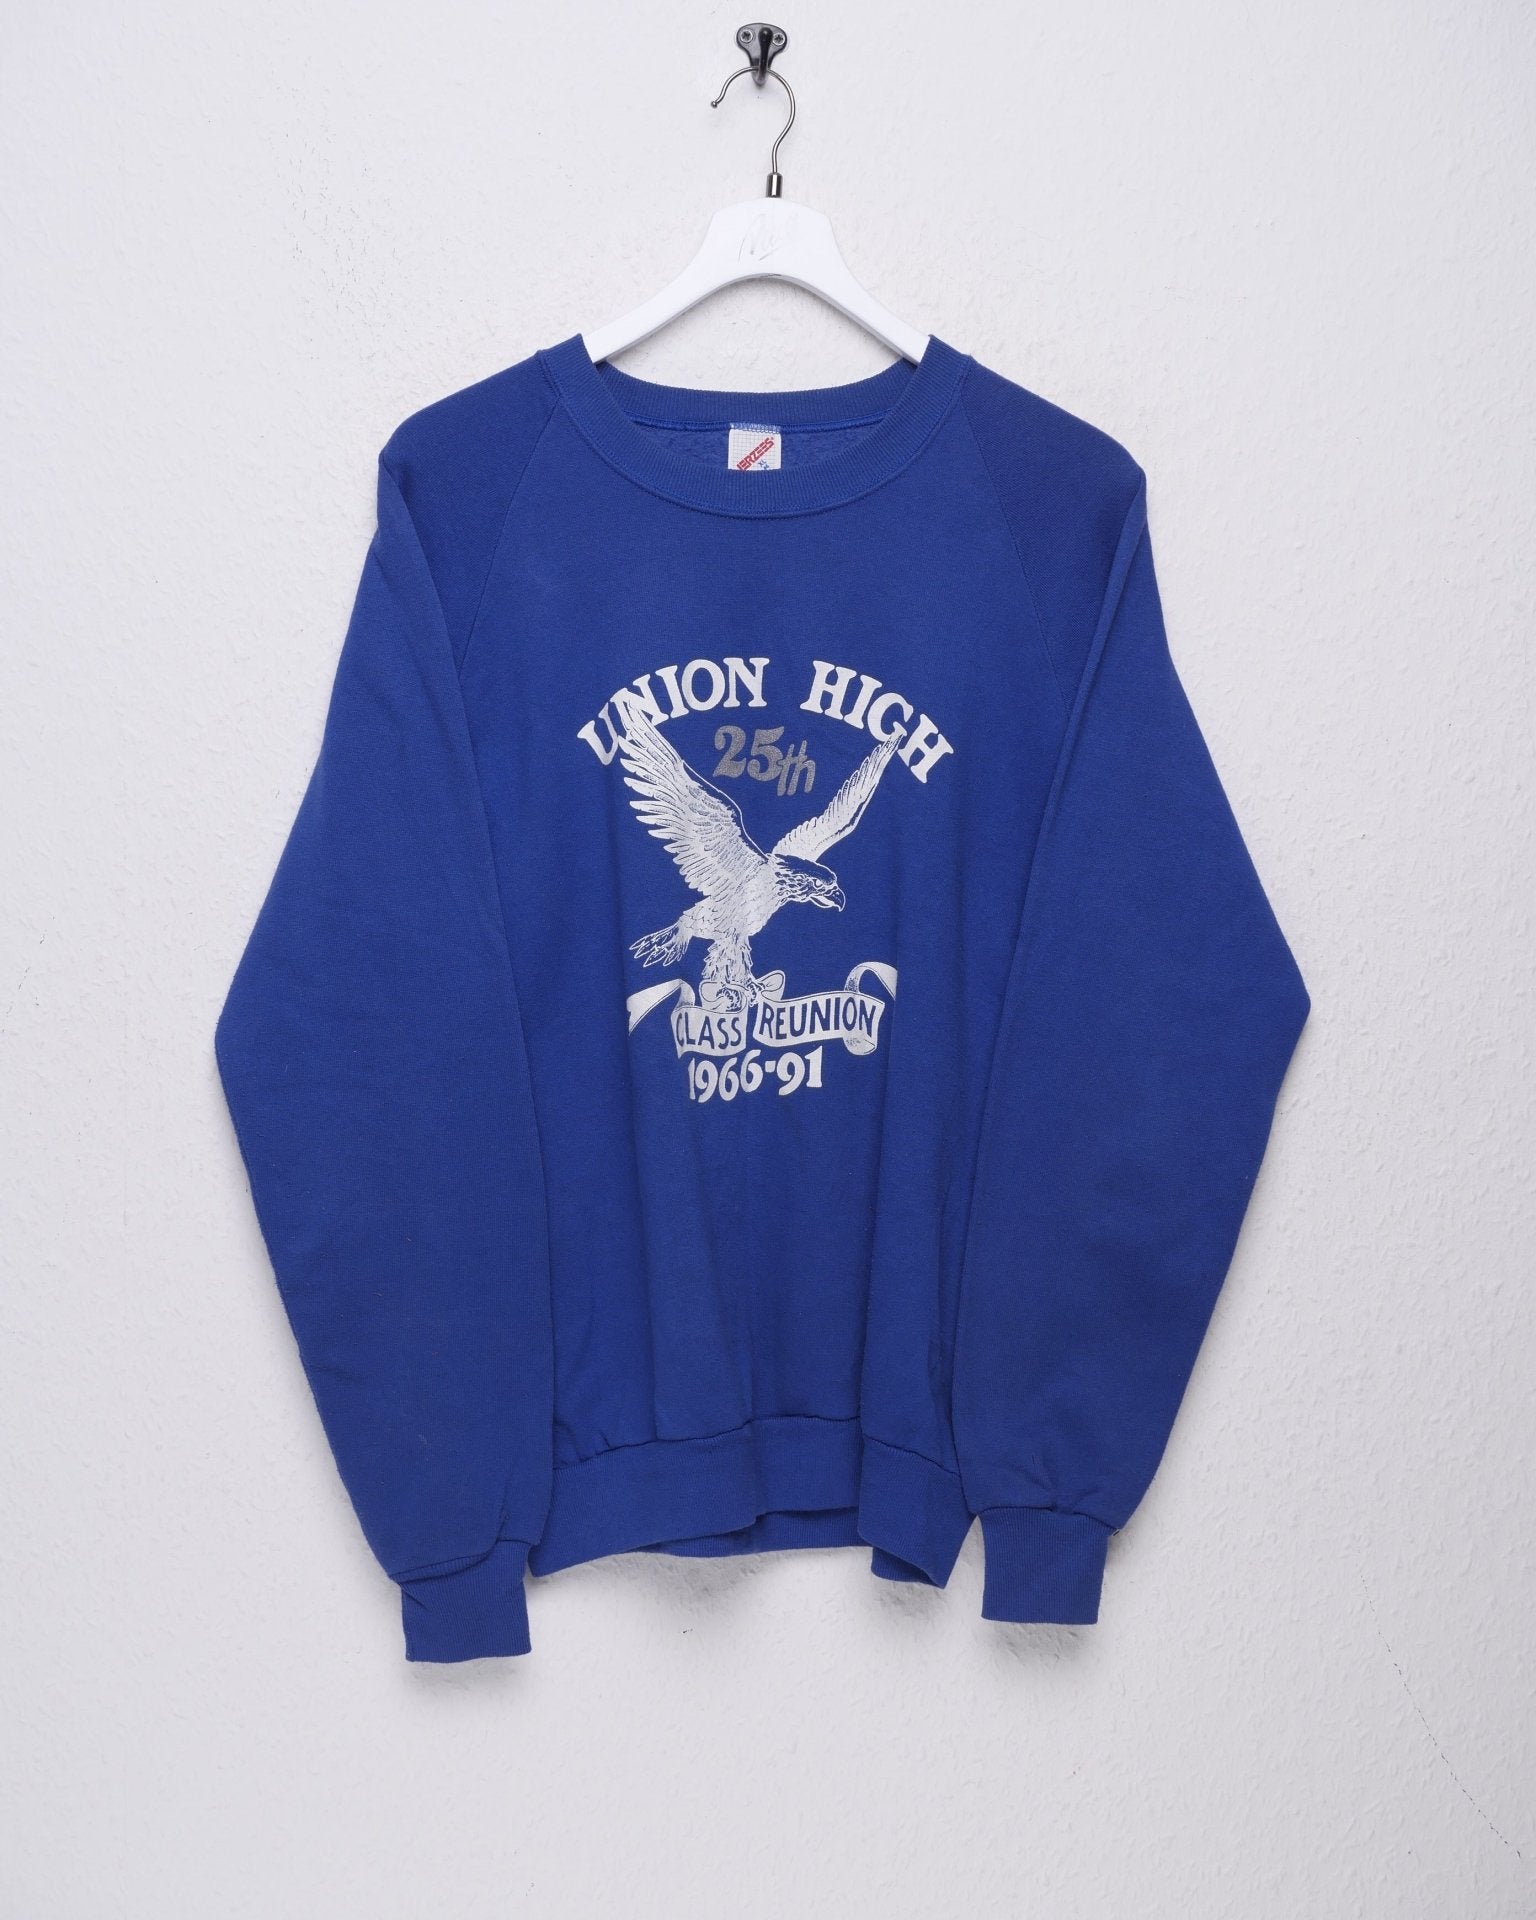 Union High 25th Class Reunion printed Graphic blue Sweater - Peeces